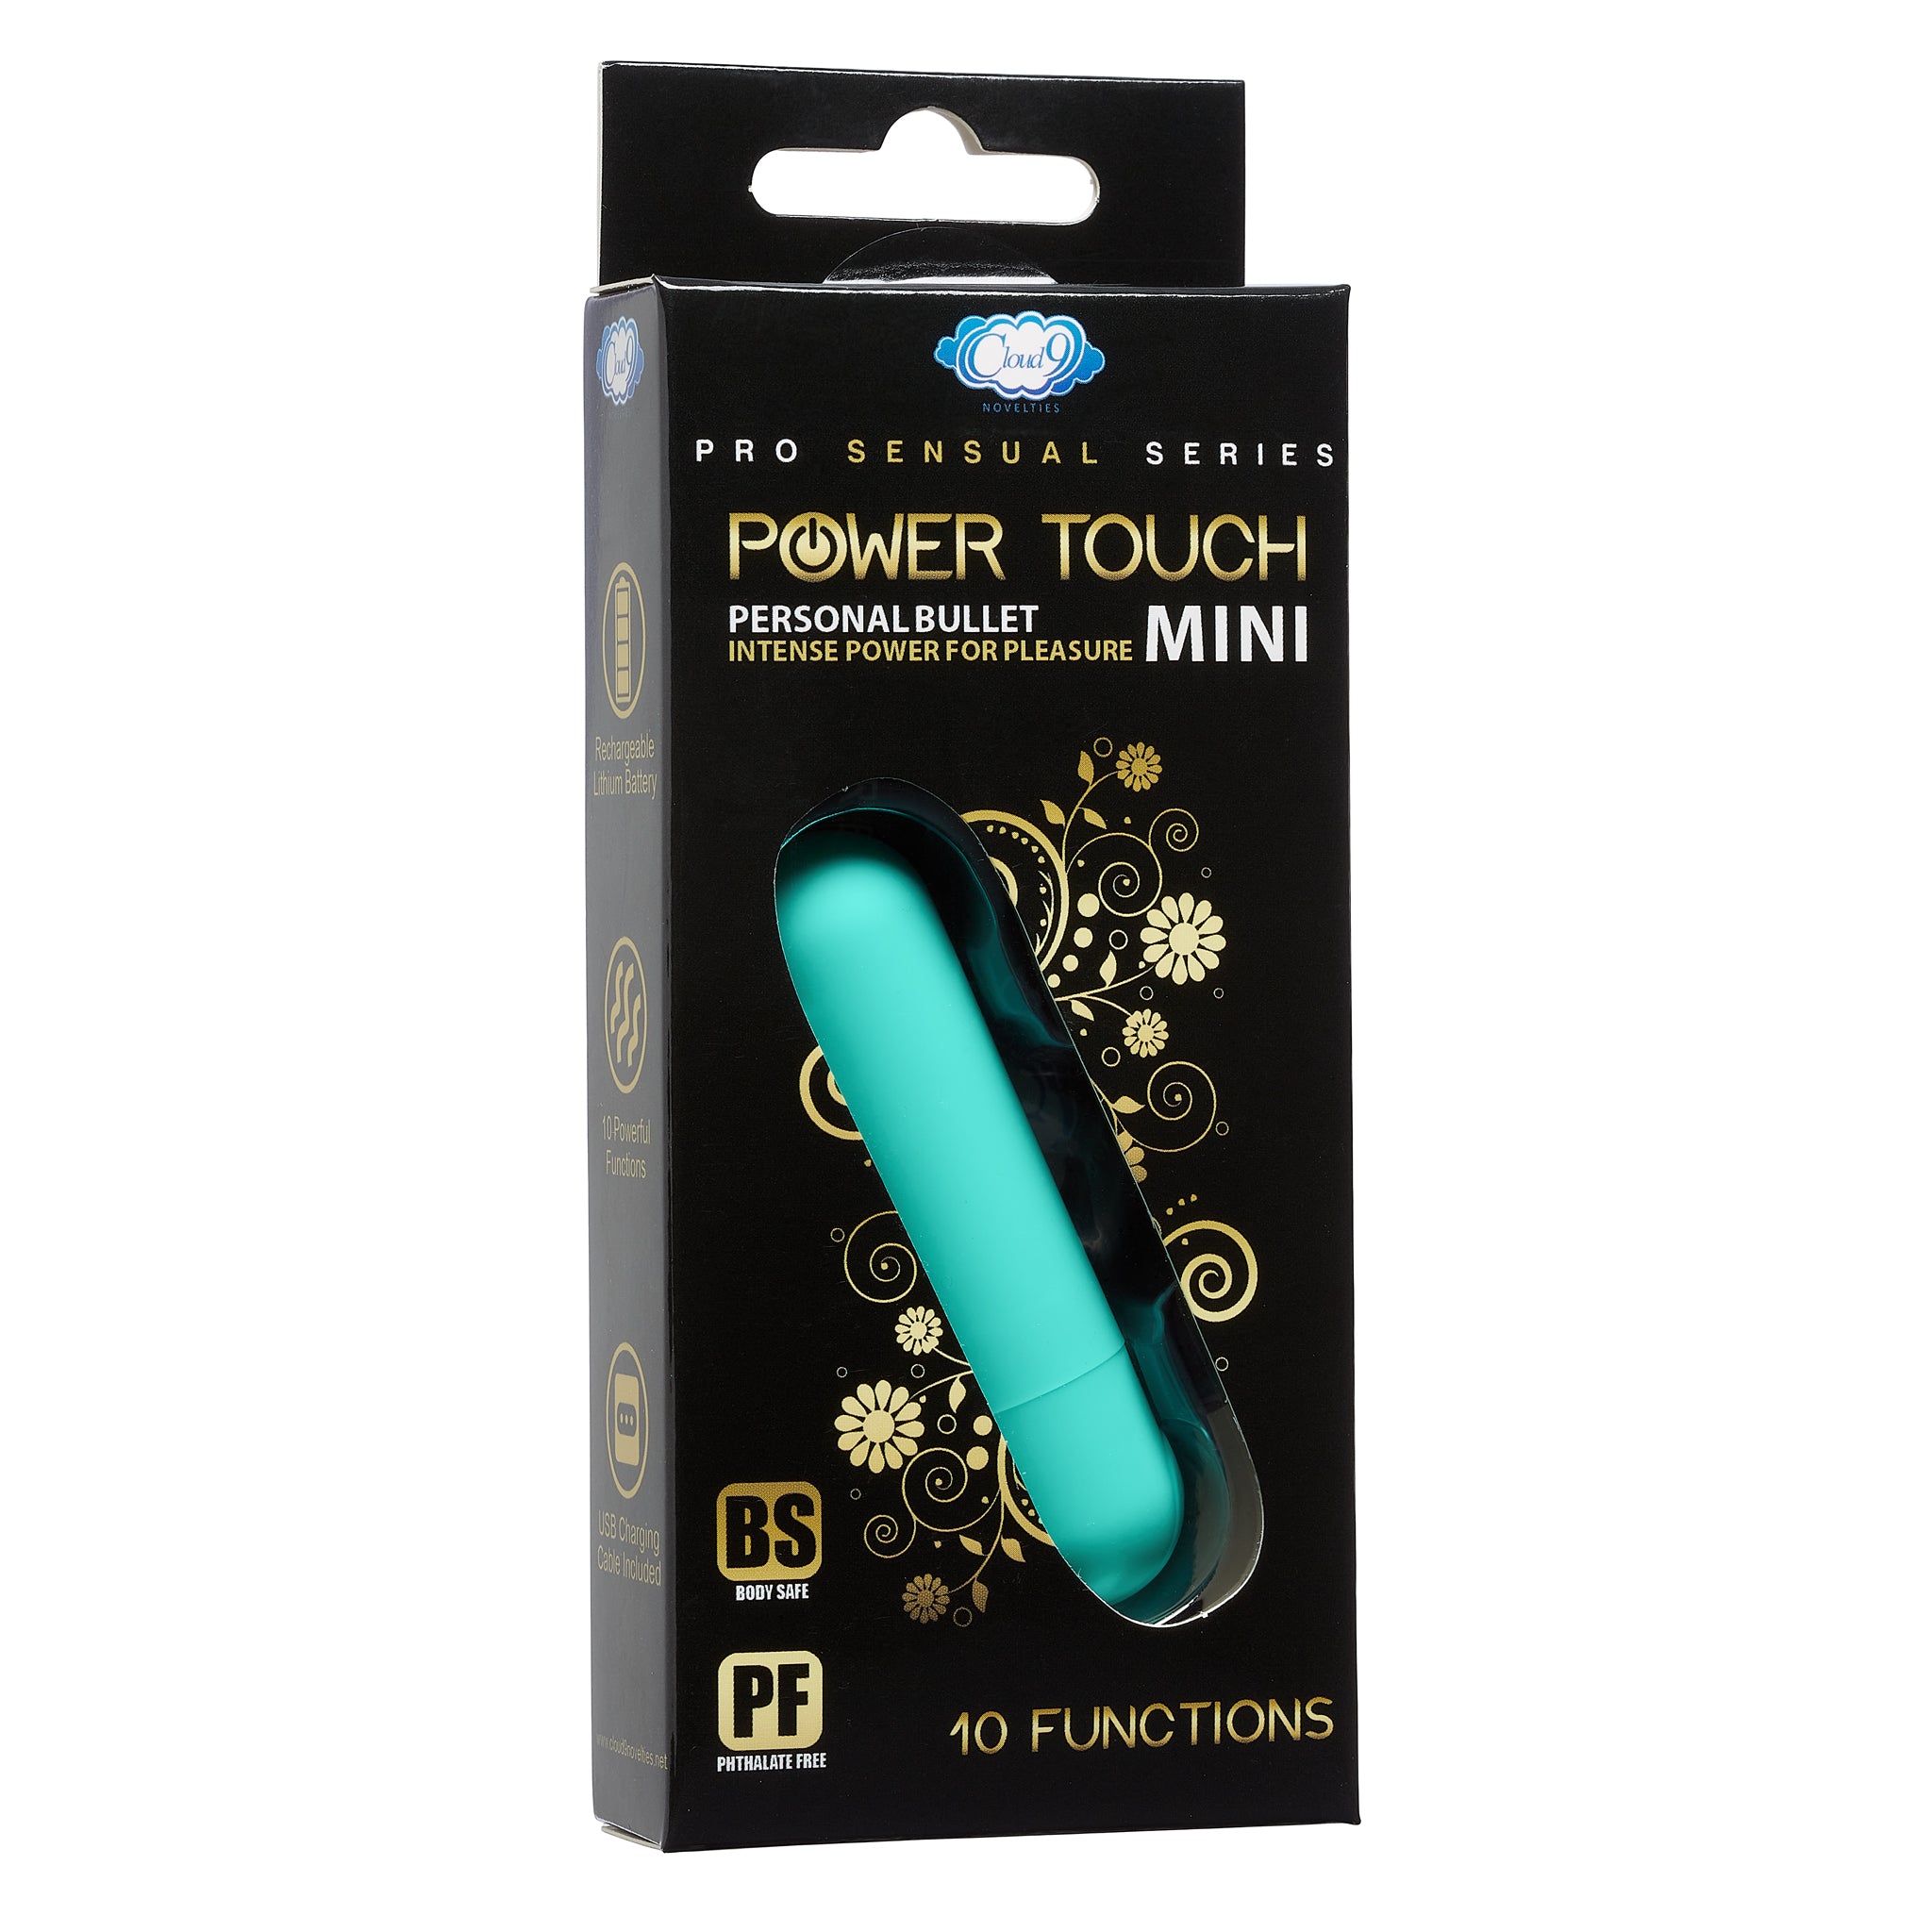 Cloud 9 Power Touch Iii - Mini Rechargeable Bullet (eaches) Teal Mini Rechargeable Bullet (eaches)